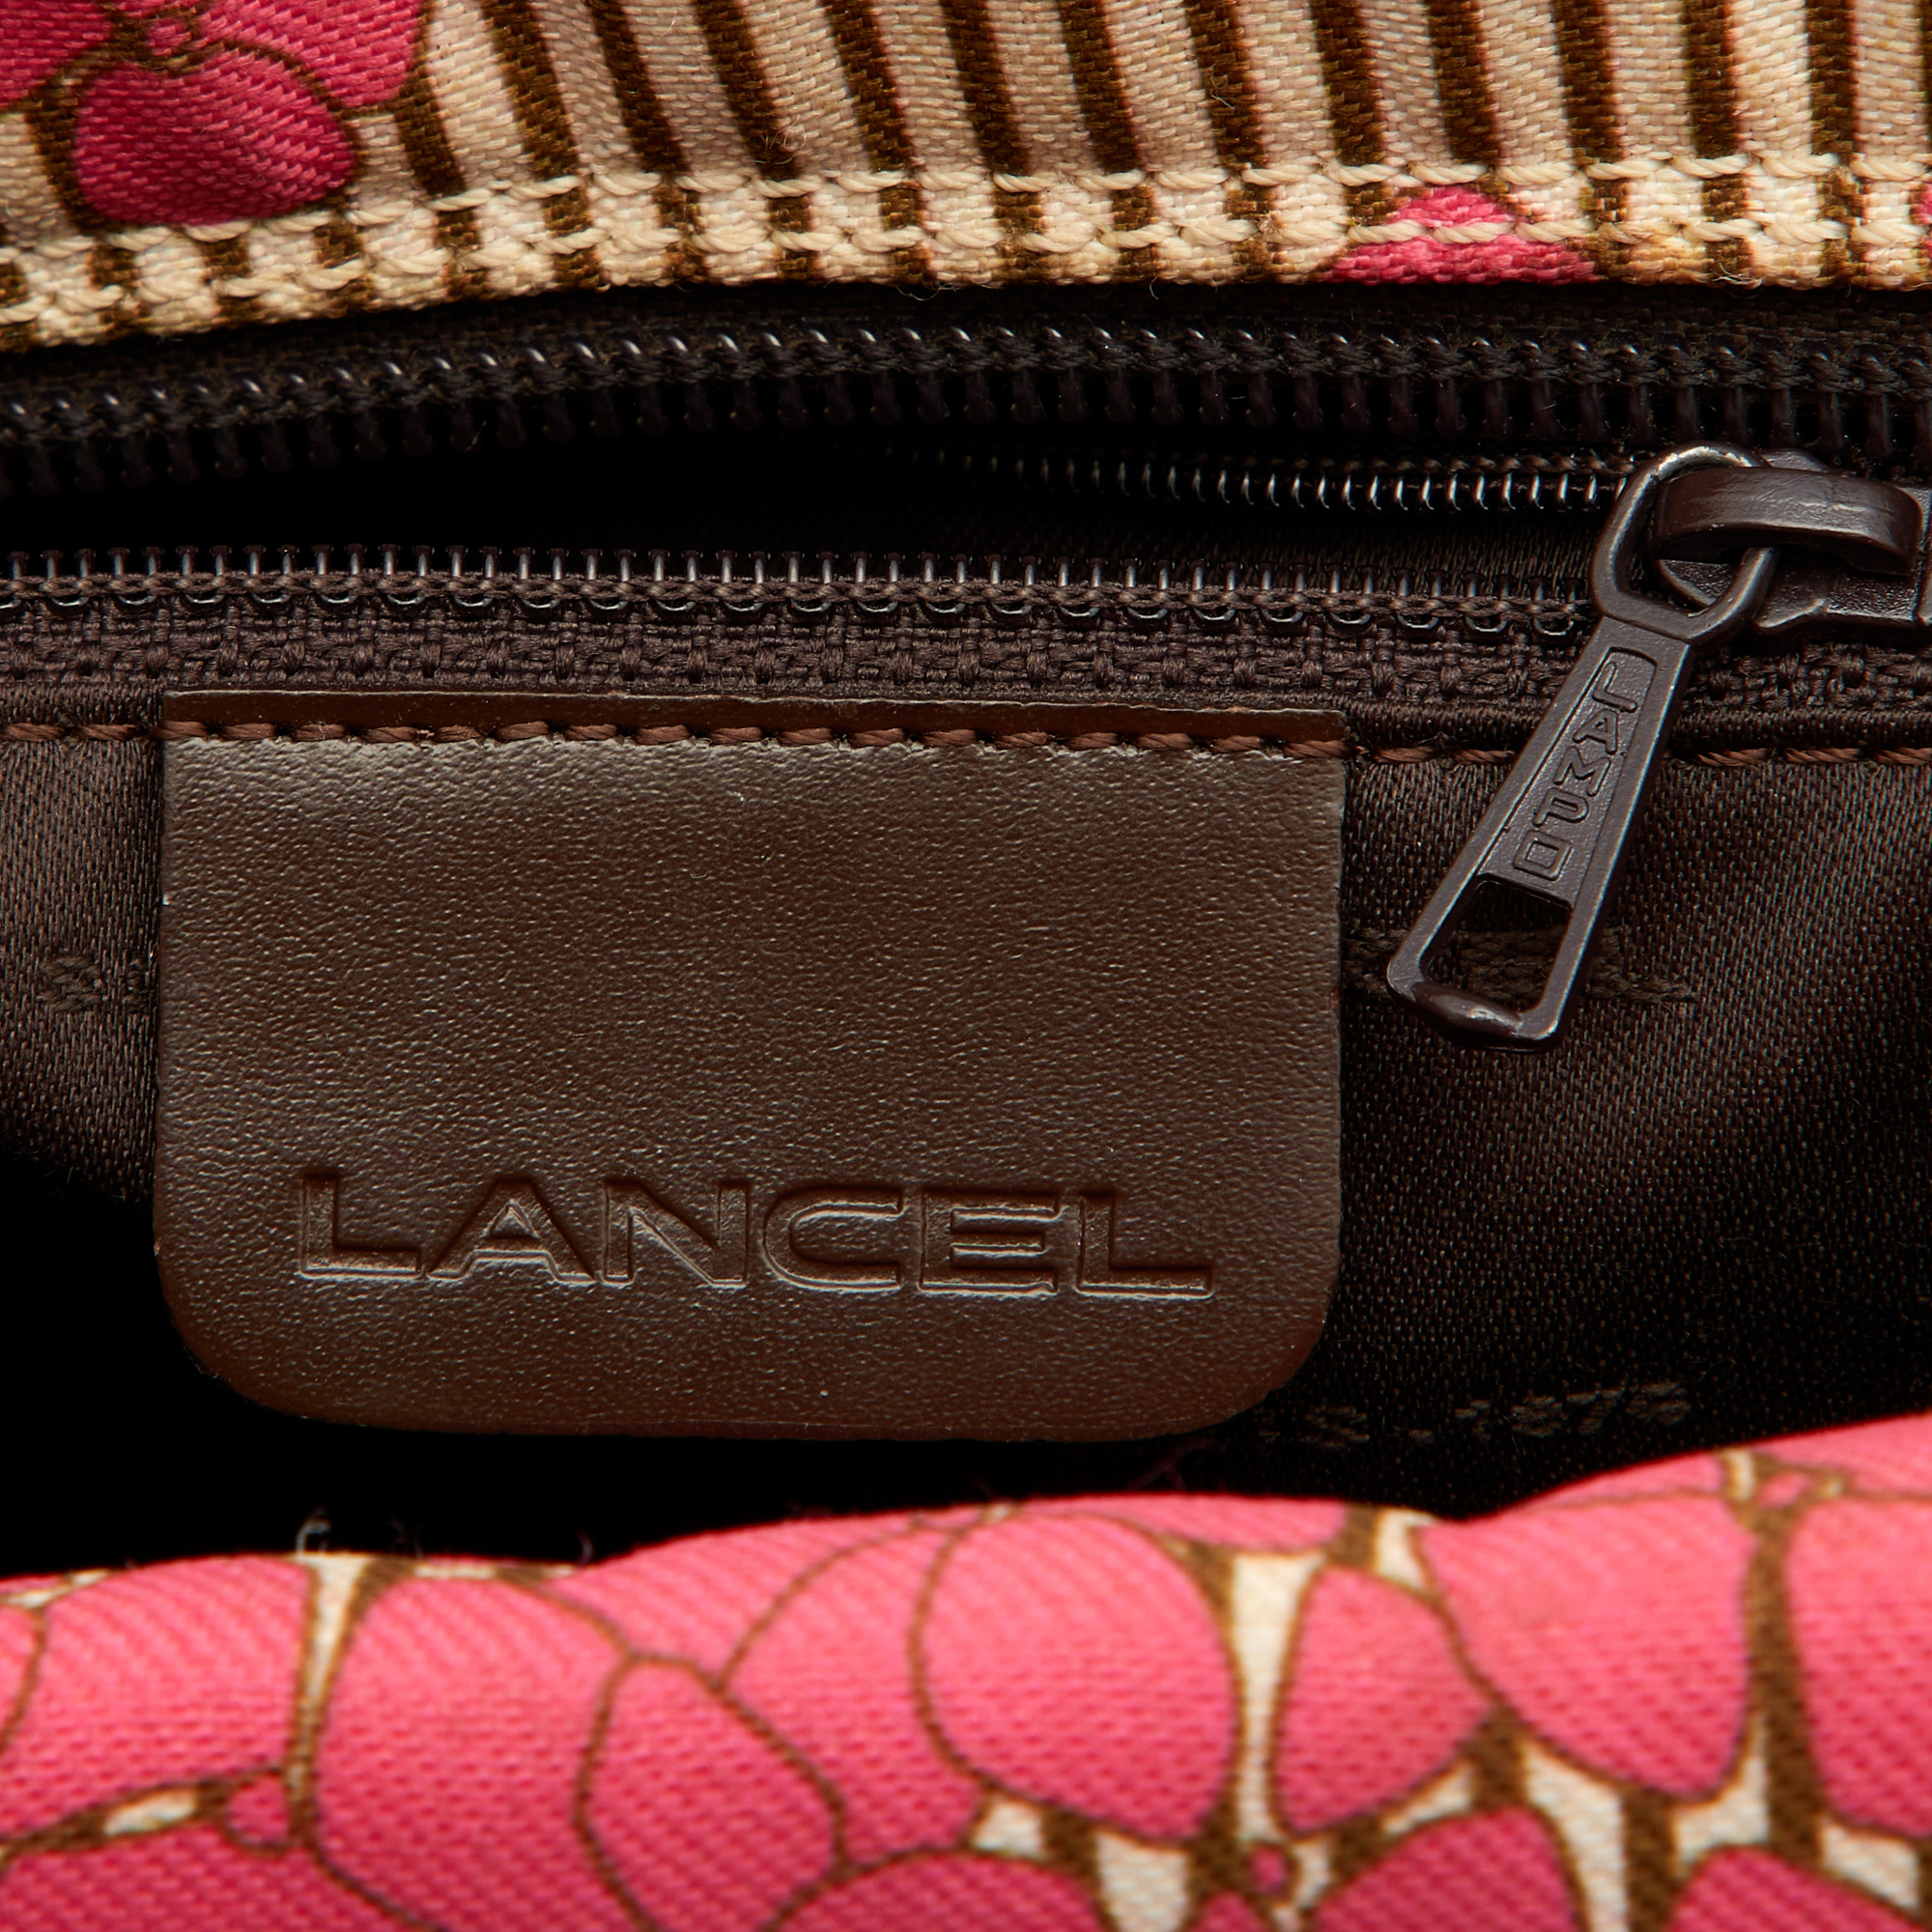 Lancel Multicolor Floral Fabric And Leather Zip Satchel